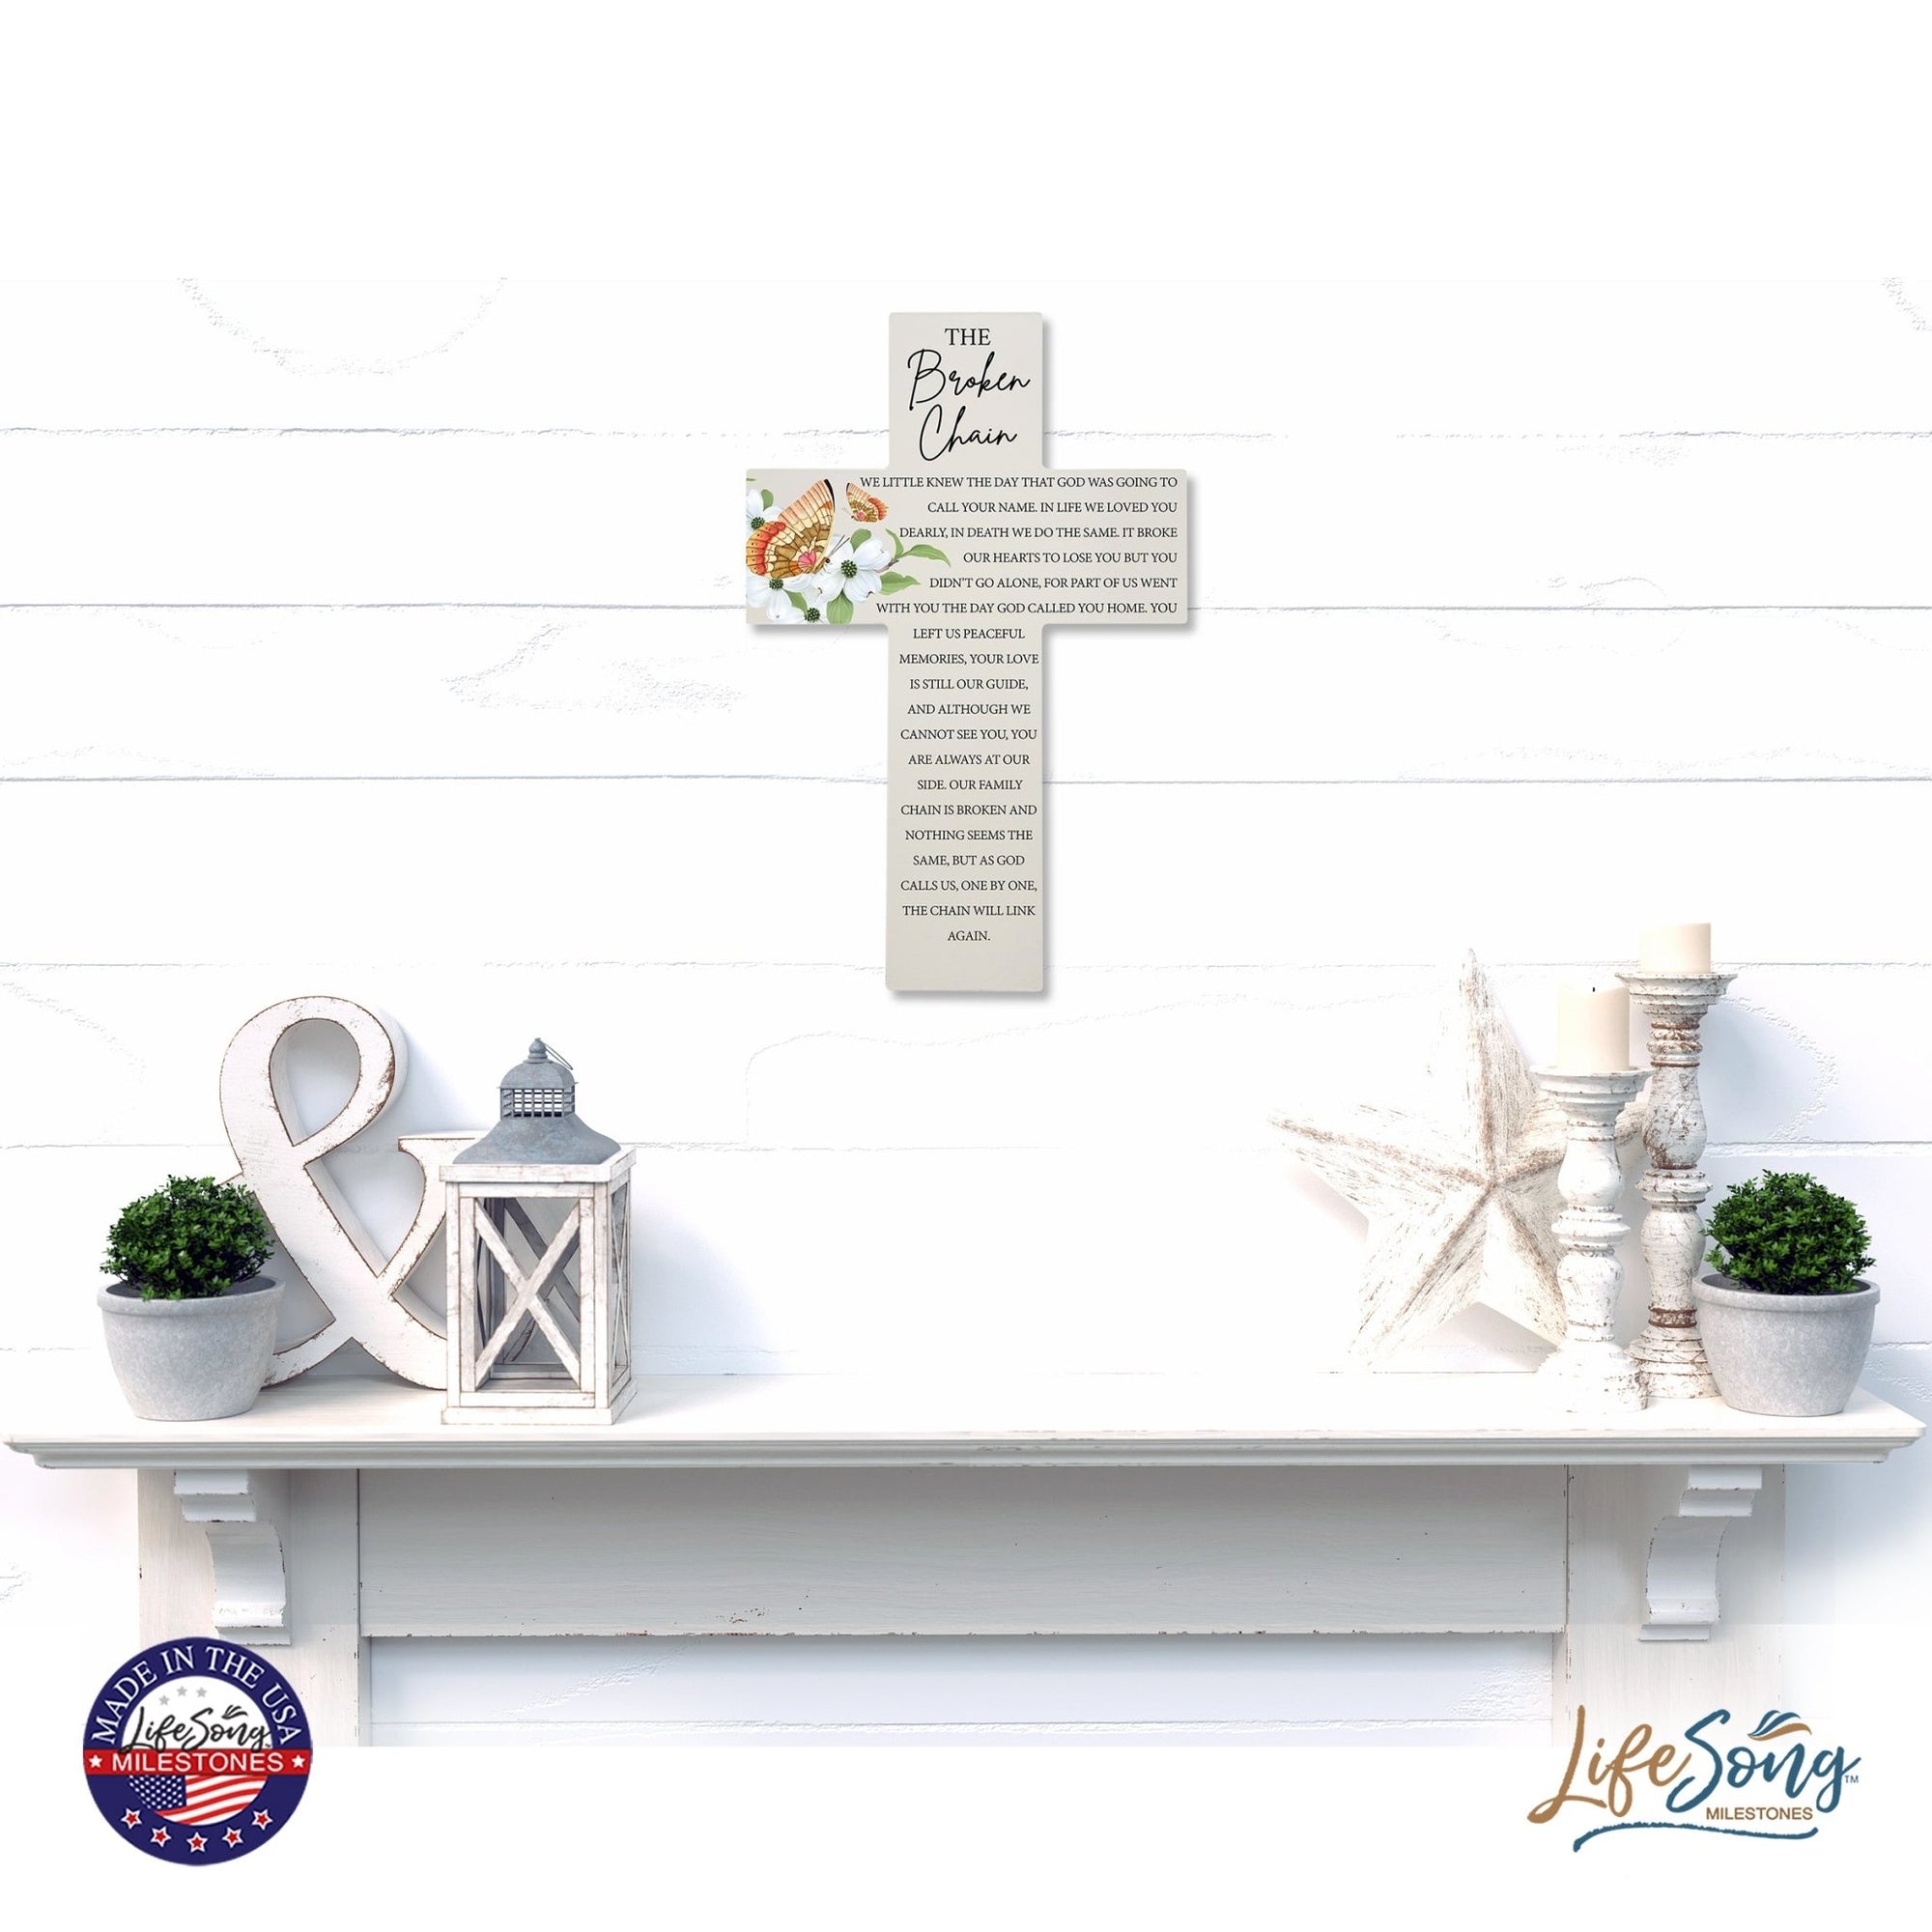 Butterfly Memorial Wall Cross For Loss of Loved One The Broken Chain Orange (Butterfly) Quote Bereavement Keepsake 14 x 9.25 The Broken Chain We Little Knew The Day That god Was Going To Call Your Name. - LifeSong Milestones